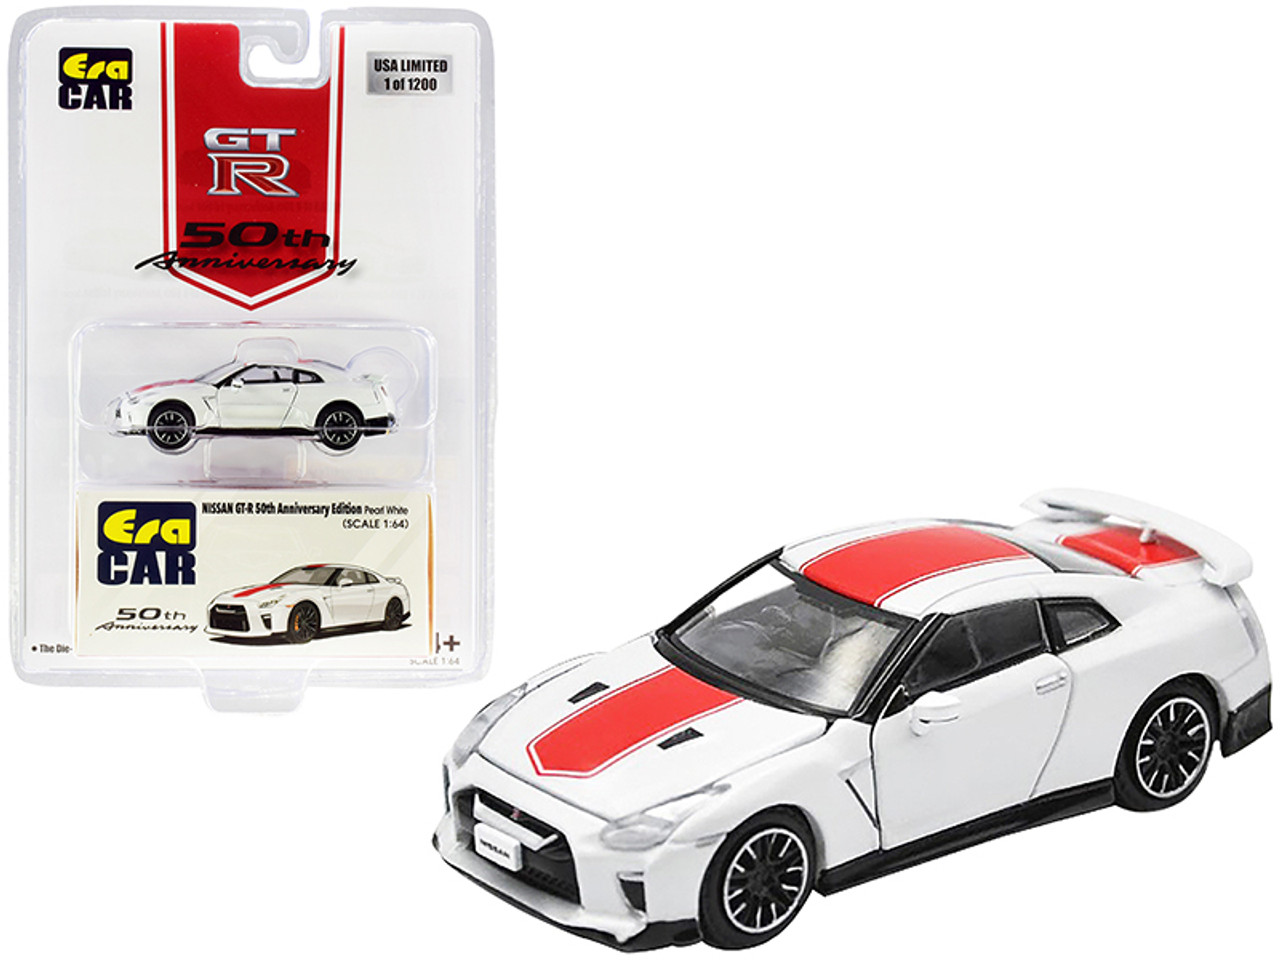 Nissan GT-R RHD (Right Hand Drive) Pearl White with Red Stripe "50th Anniversary Edition" Limited Edition to 1200 pieces 1/64 Diecast Model Car by Era Car